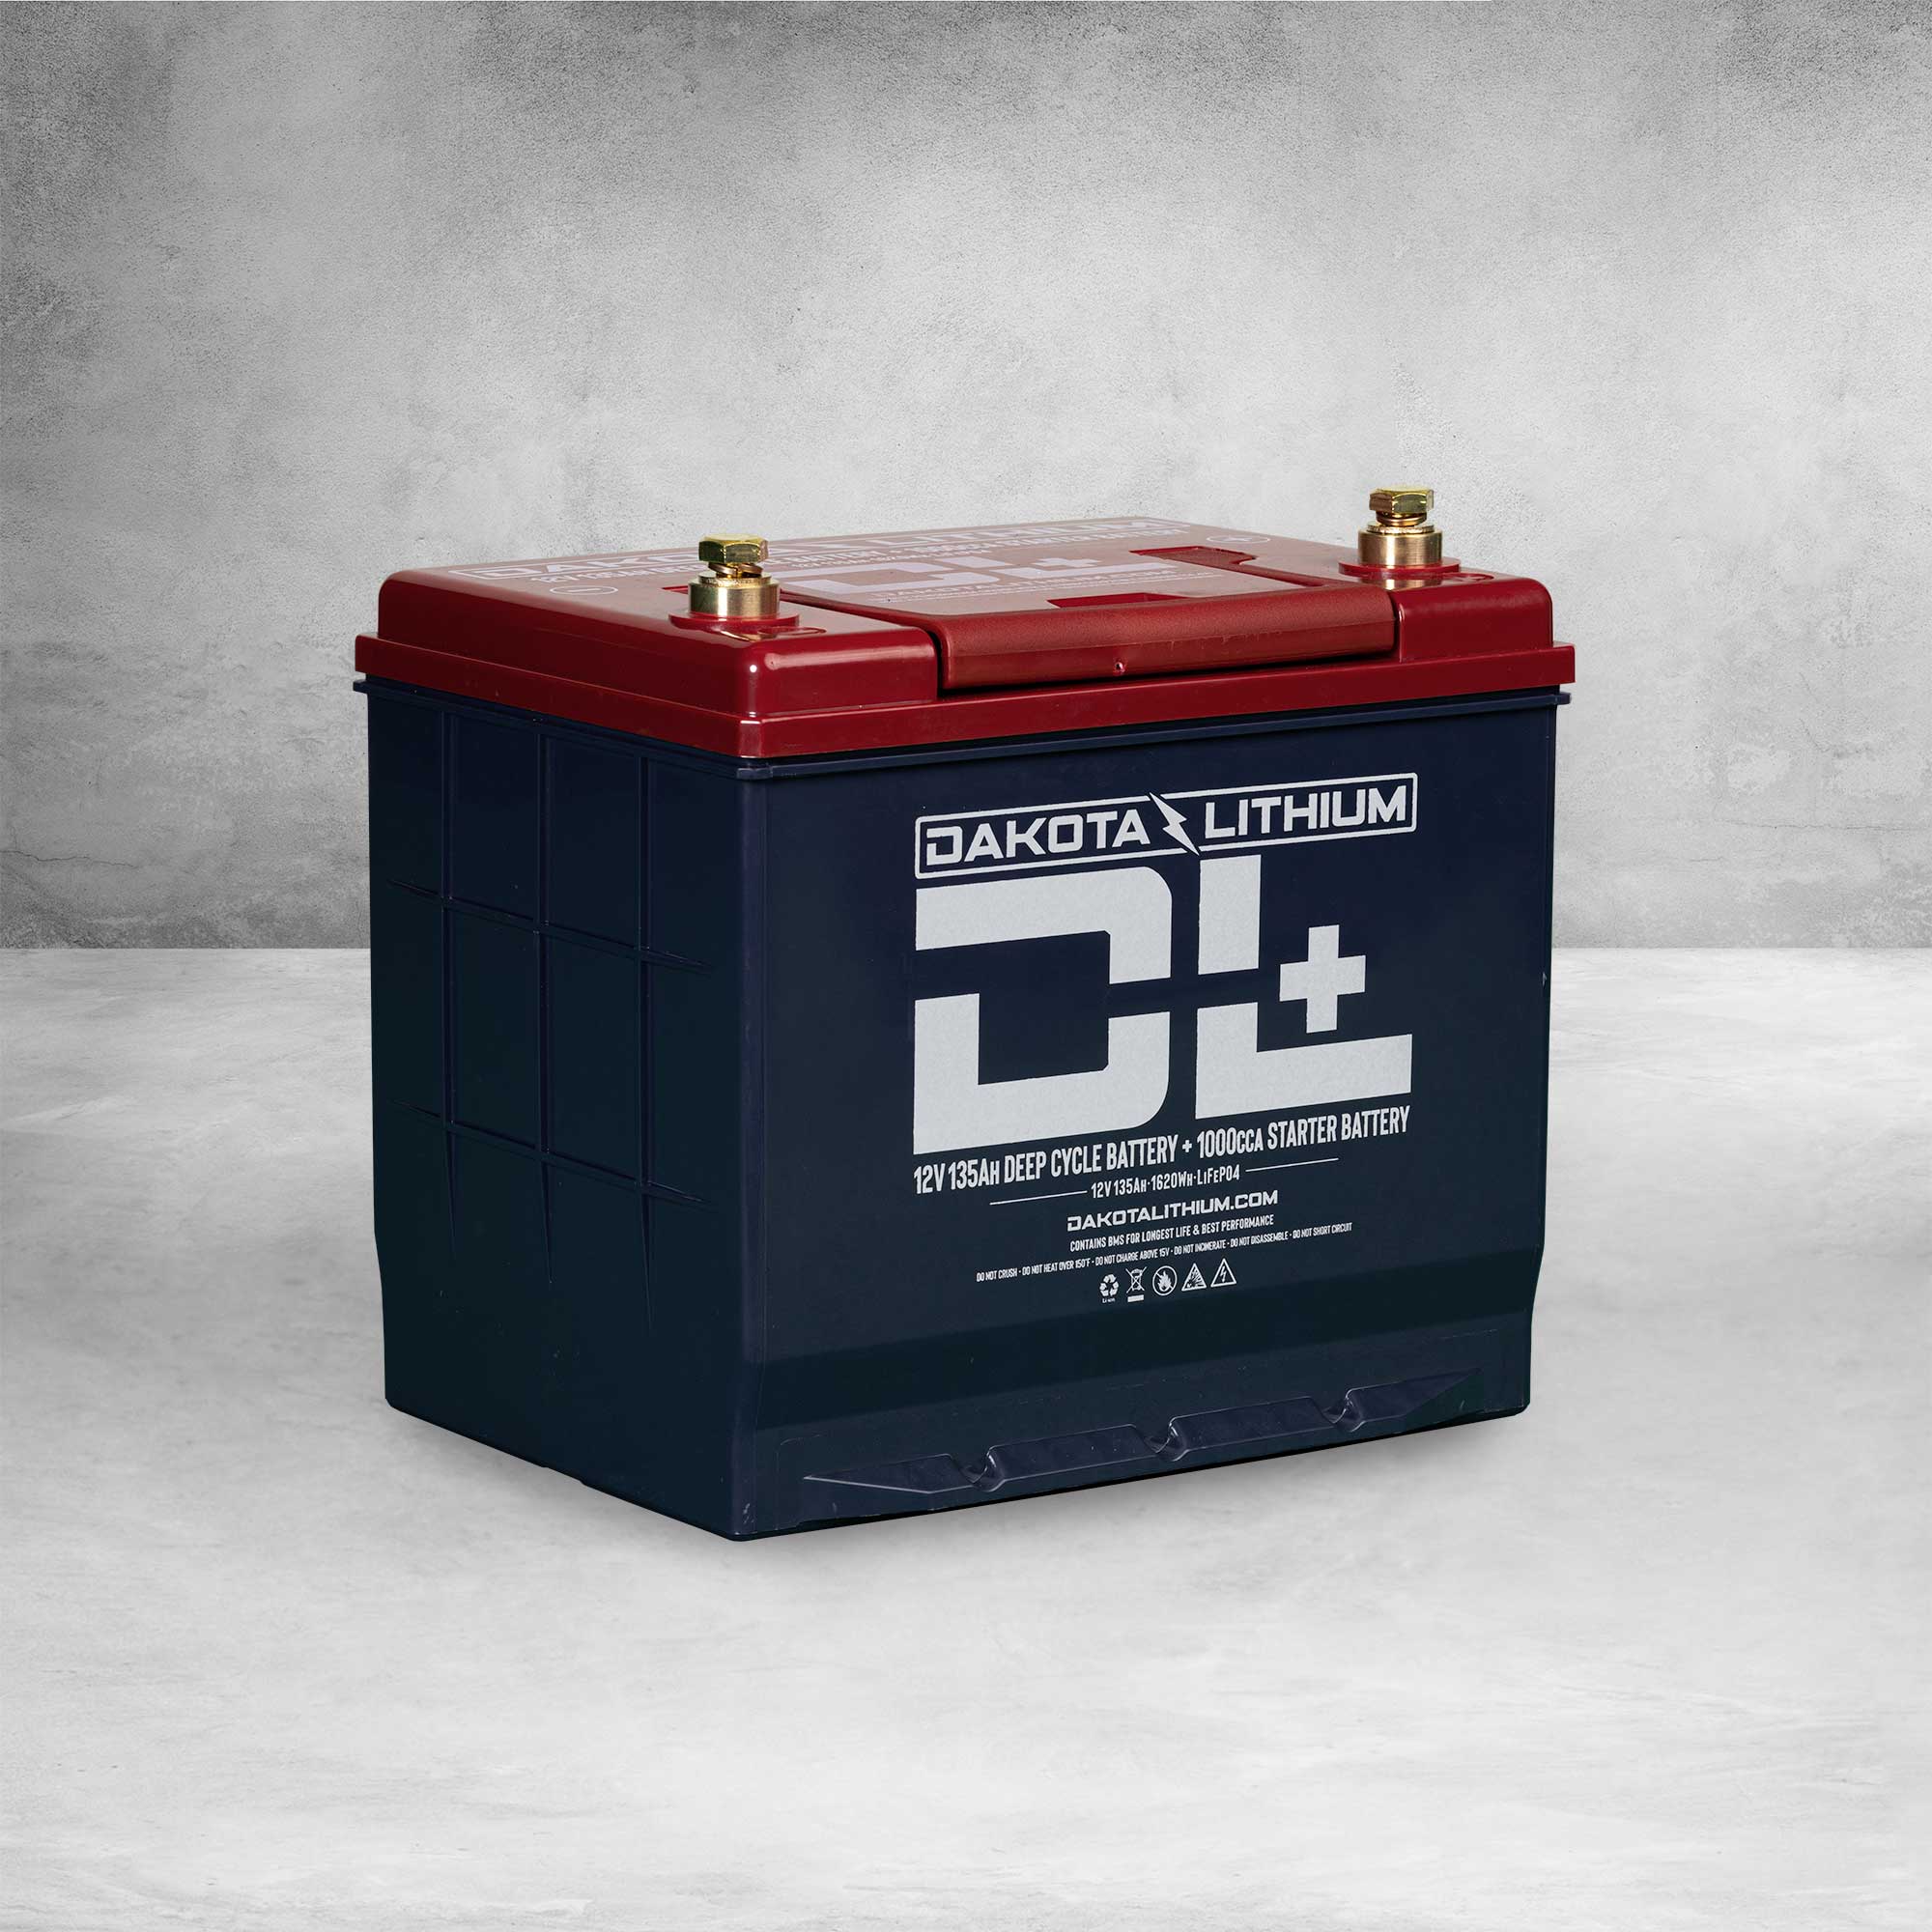 DL 12V 100Ah LiFePO4 Deep Cycle Lithium Battery for Trolling Motor Carts  Solar 10A LiFePO4 charger included